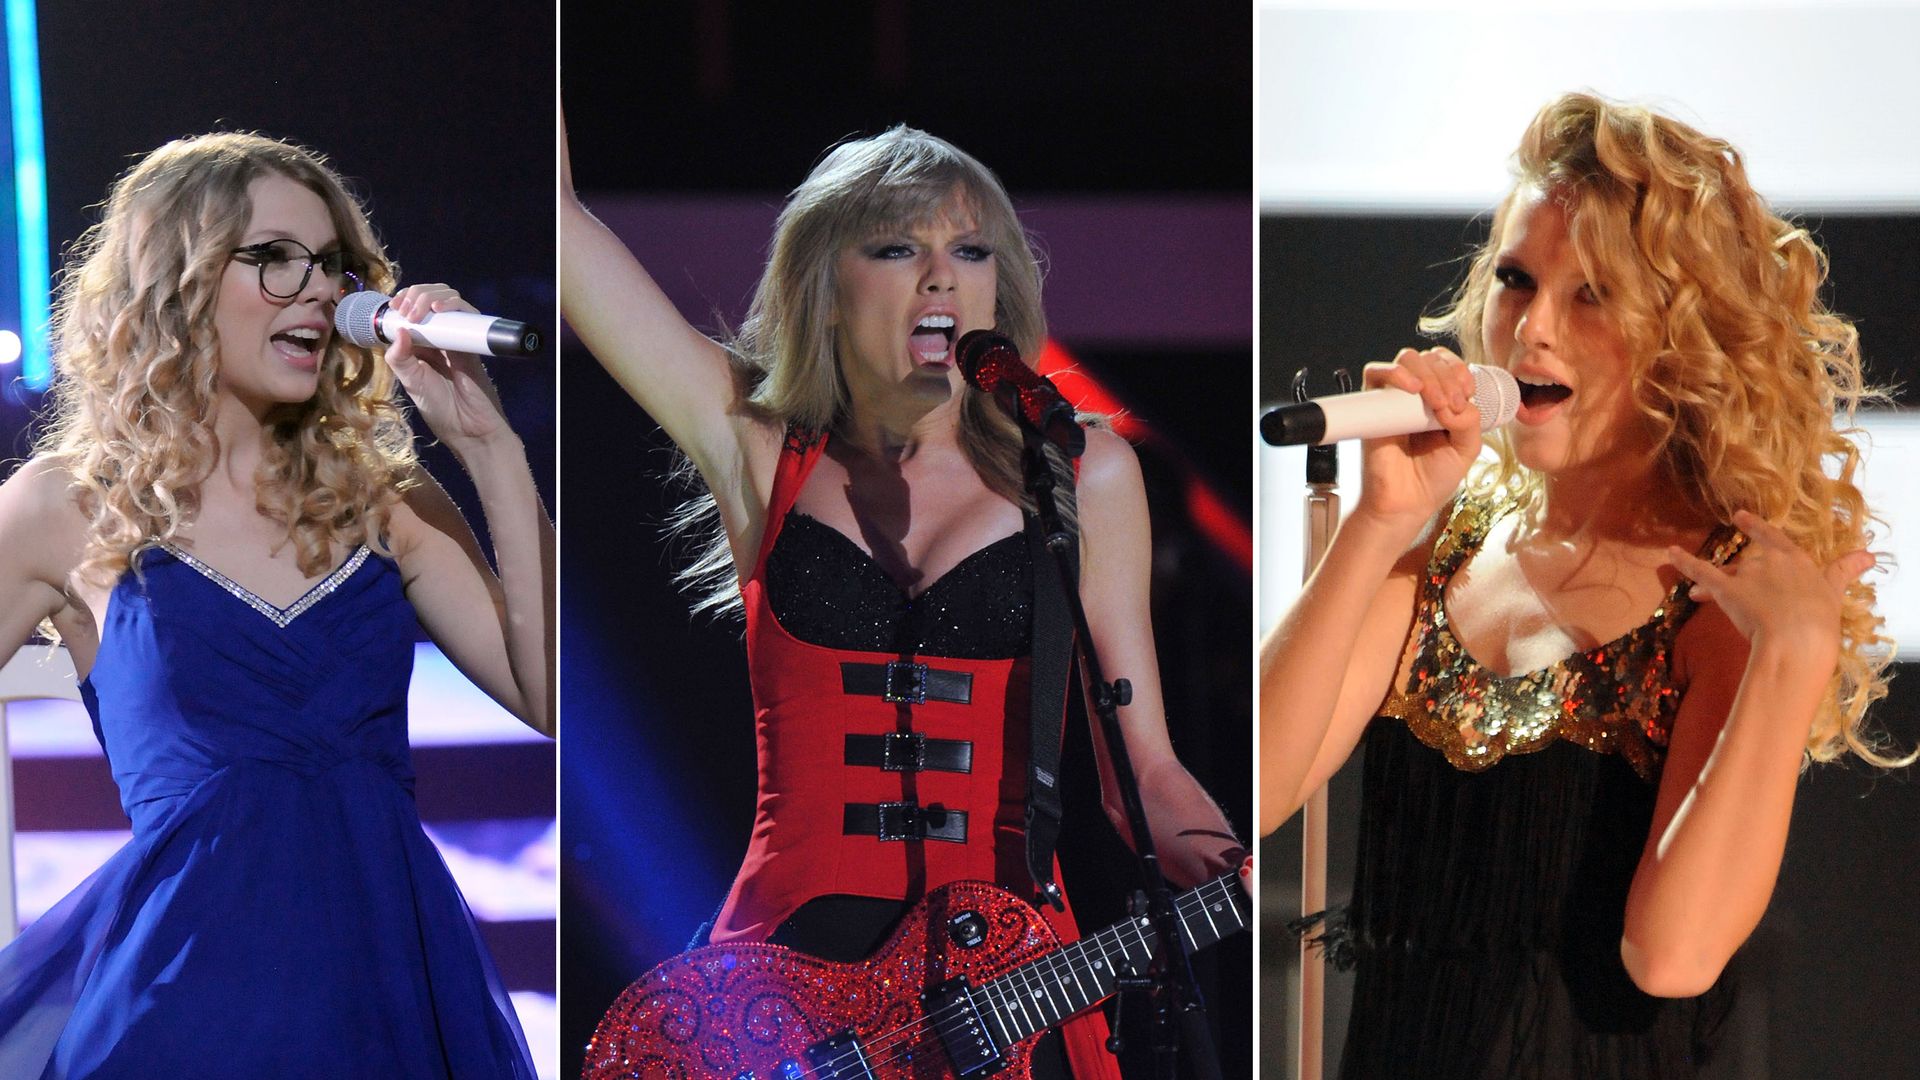 Taylor Swift’s most iconic CMT performances -  see her head-turning outfits over the years